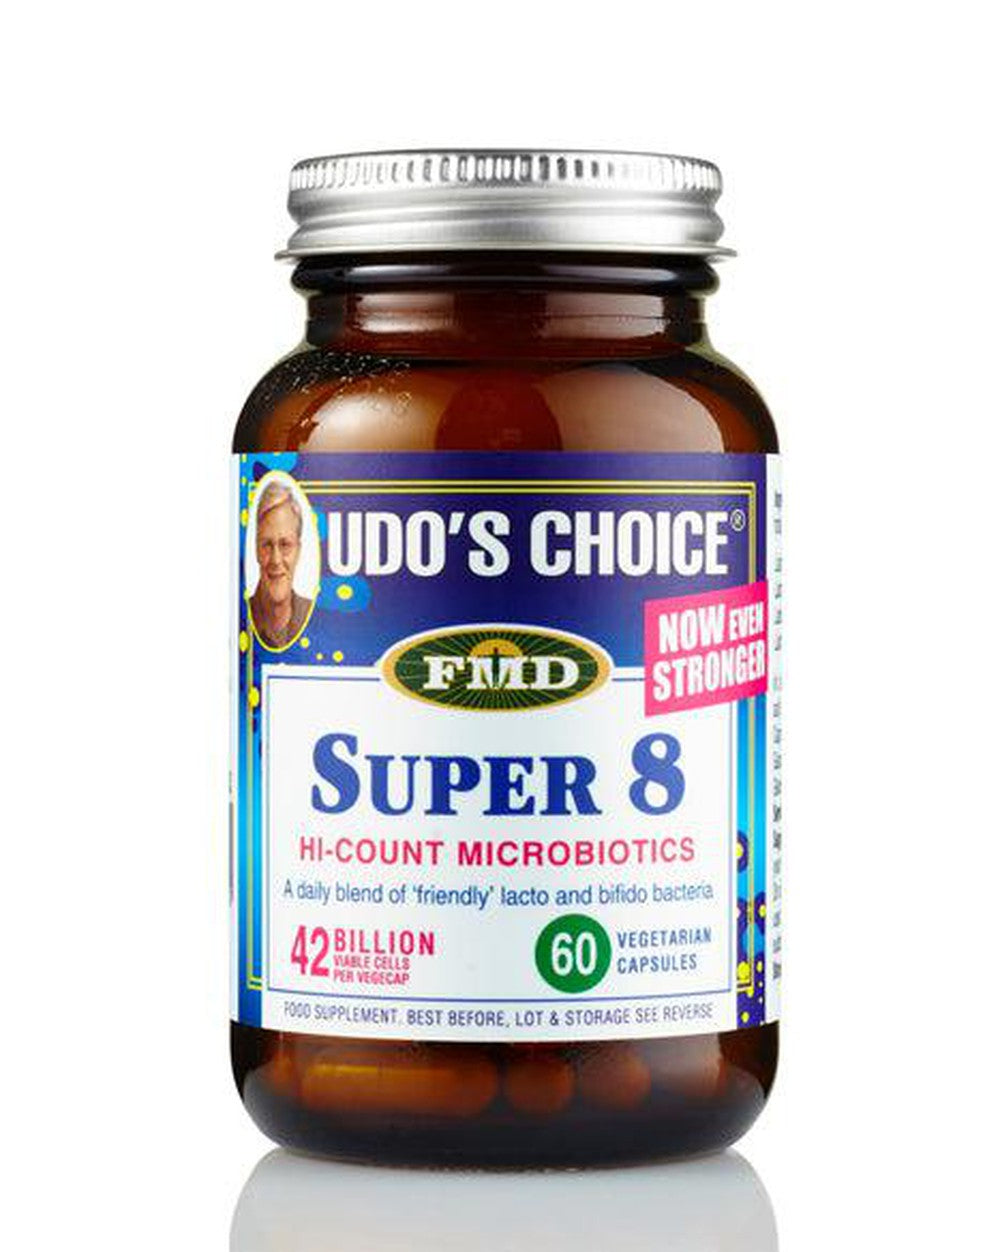 Udo's Choice Super 8 Microbiotic 60 Caps- Lillys Pharmacy and Health Store